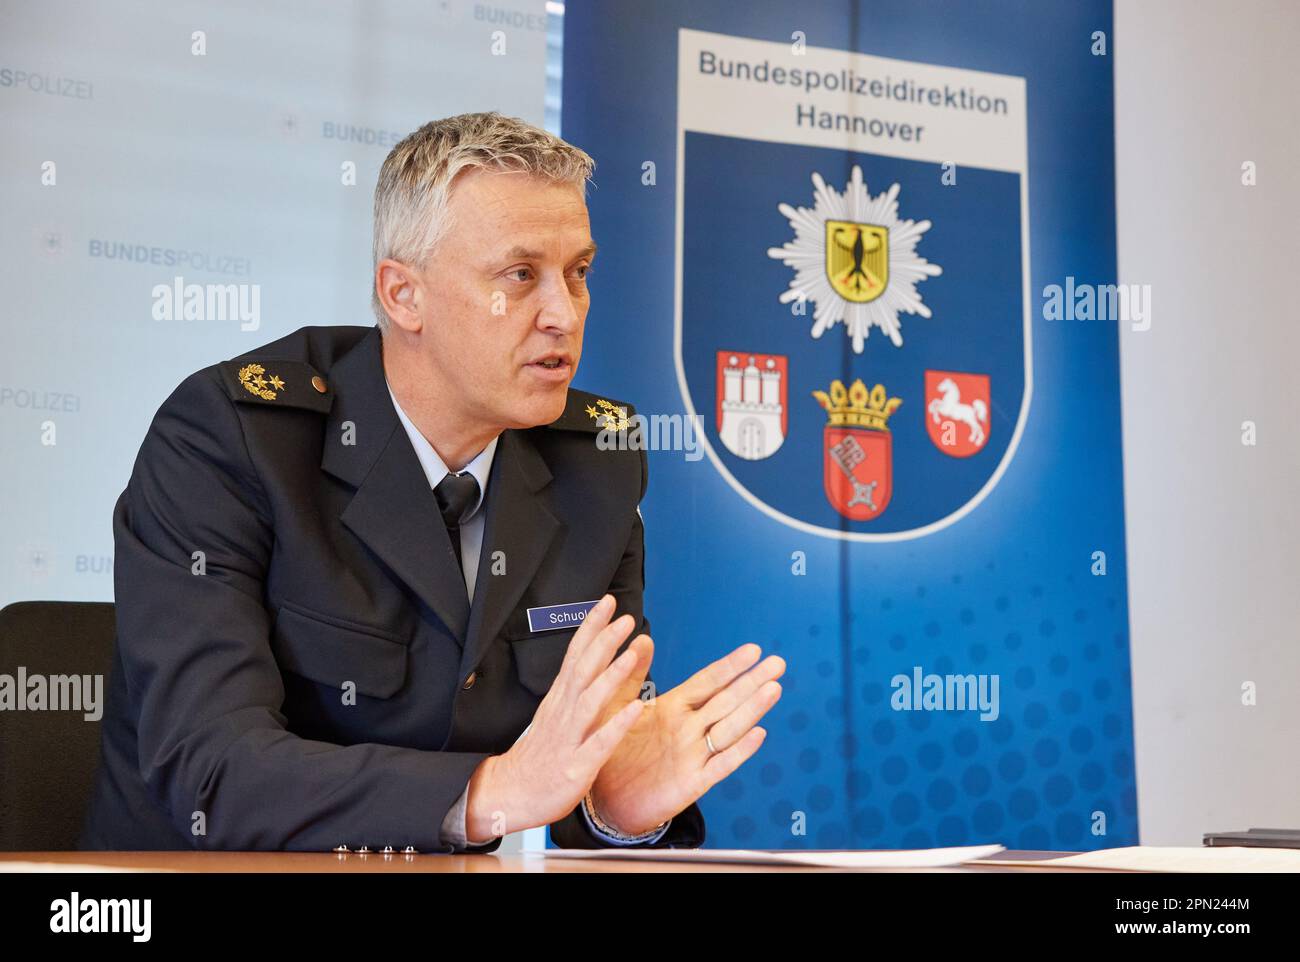 Hamburg, Germany. 16th Apr, 2023. Michael Schuol, President of the Federal Police, gives a press conference. The Federal Police controlled the no-weapons zone at Hamburg Central Station over the weekend. Credit: Georg